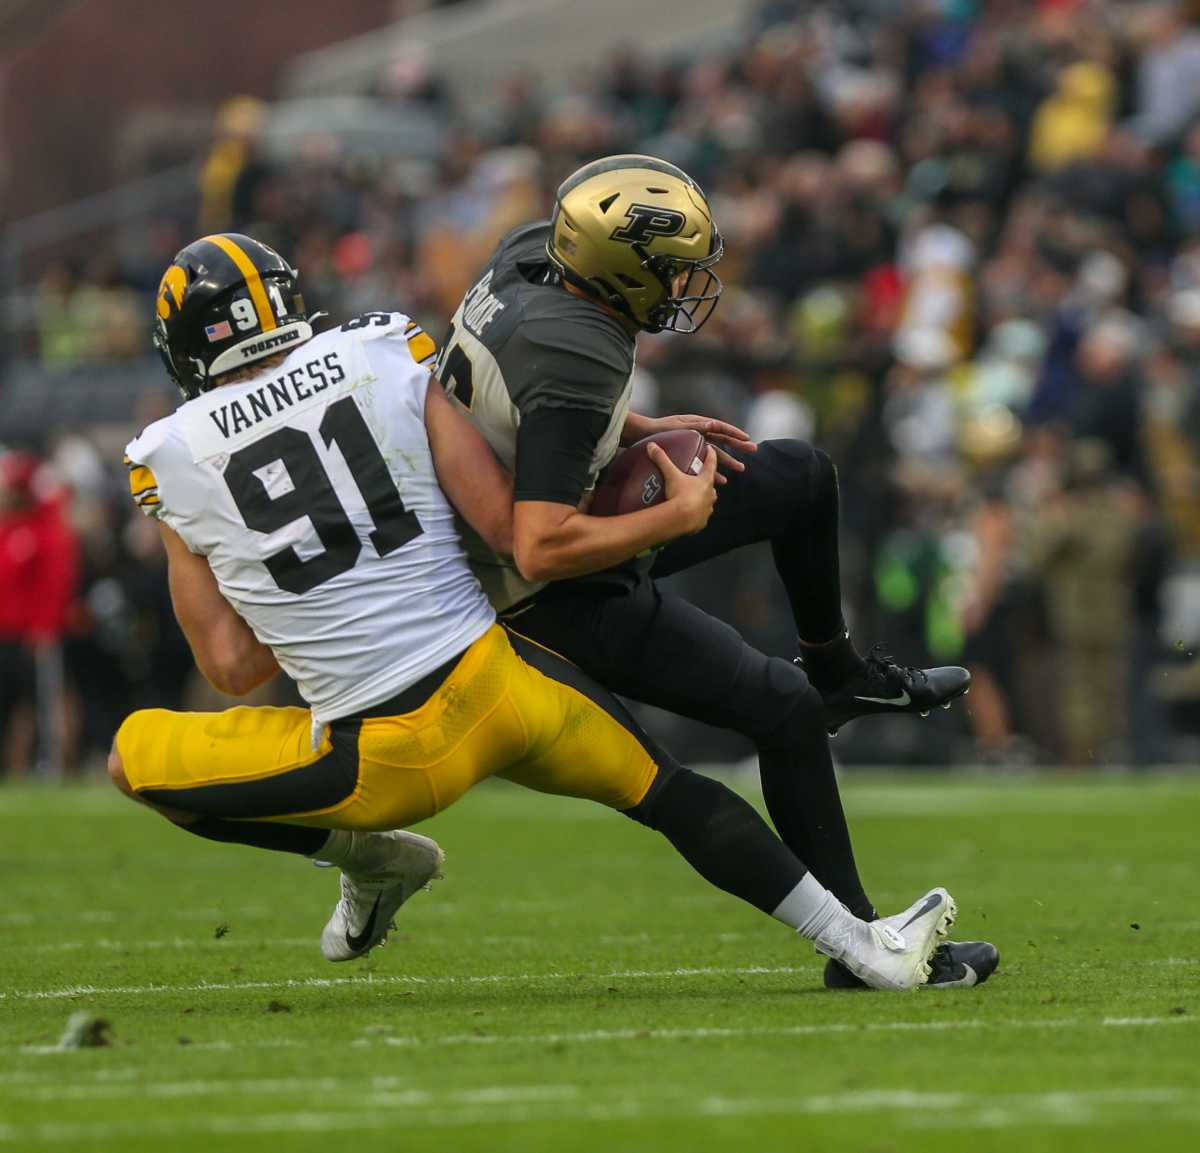 Iowa Hawkeyes defensive lineman Lukas Van Ness (91) sacks Purdue Boilermakers quarterback Aidan O'Connell (16) during the NCAA football game against the Purdue Boilermakers, Saturday, Nov. 5, 2022, at Ross-Ade Stadium in West Lafayette, Ind. Np1 1076